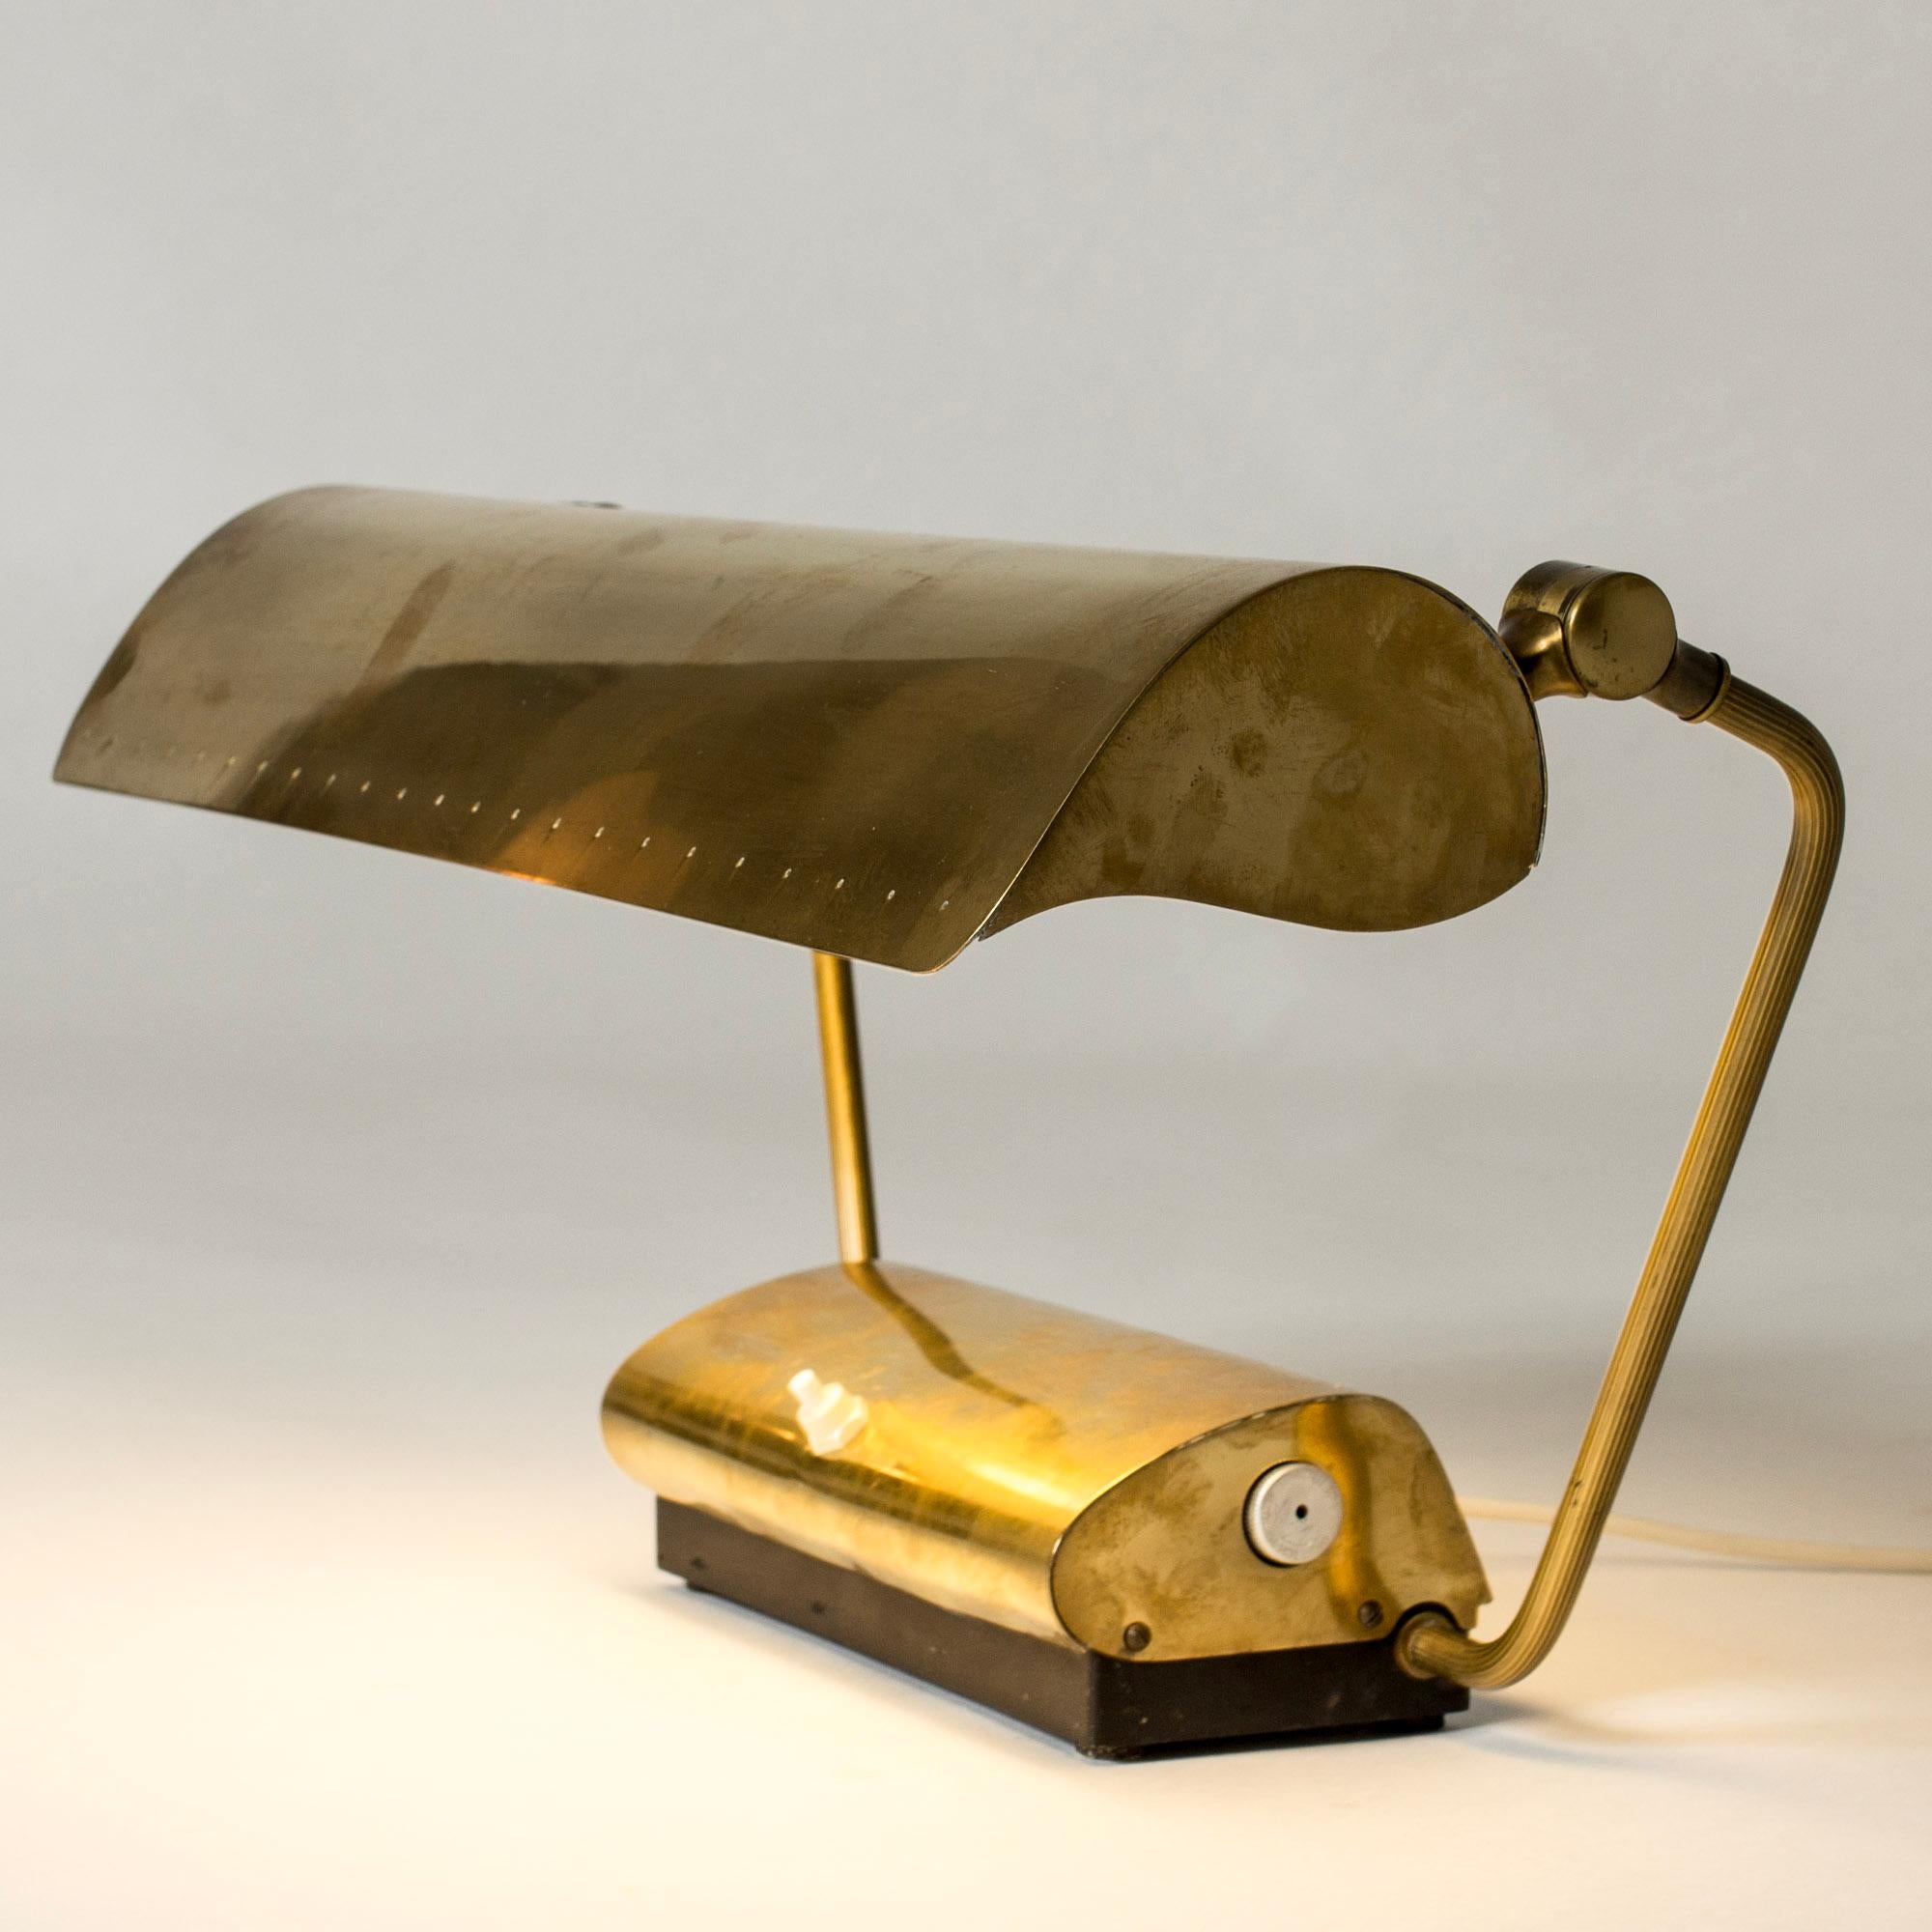 Dutch Midcentury Brass Desk lamp, Philips, The Netherlands, 1940s For Sale